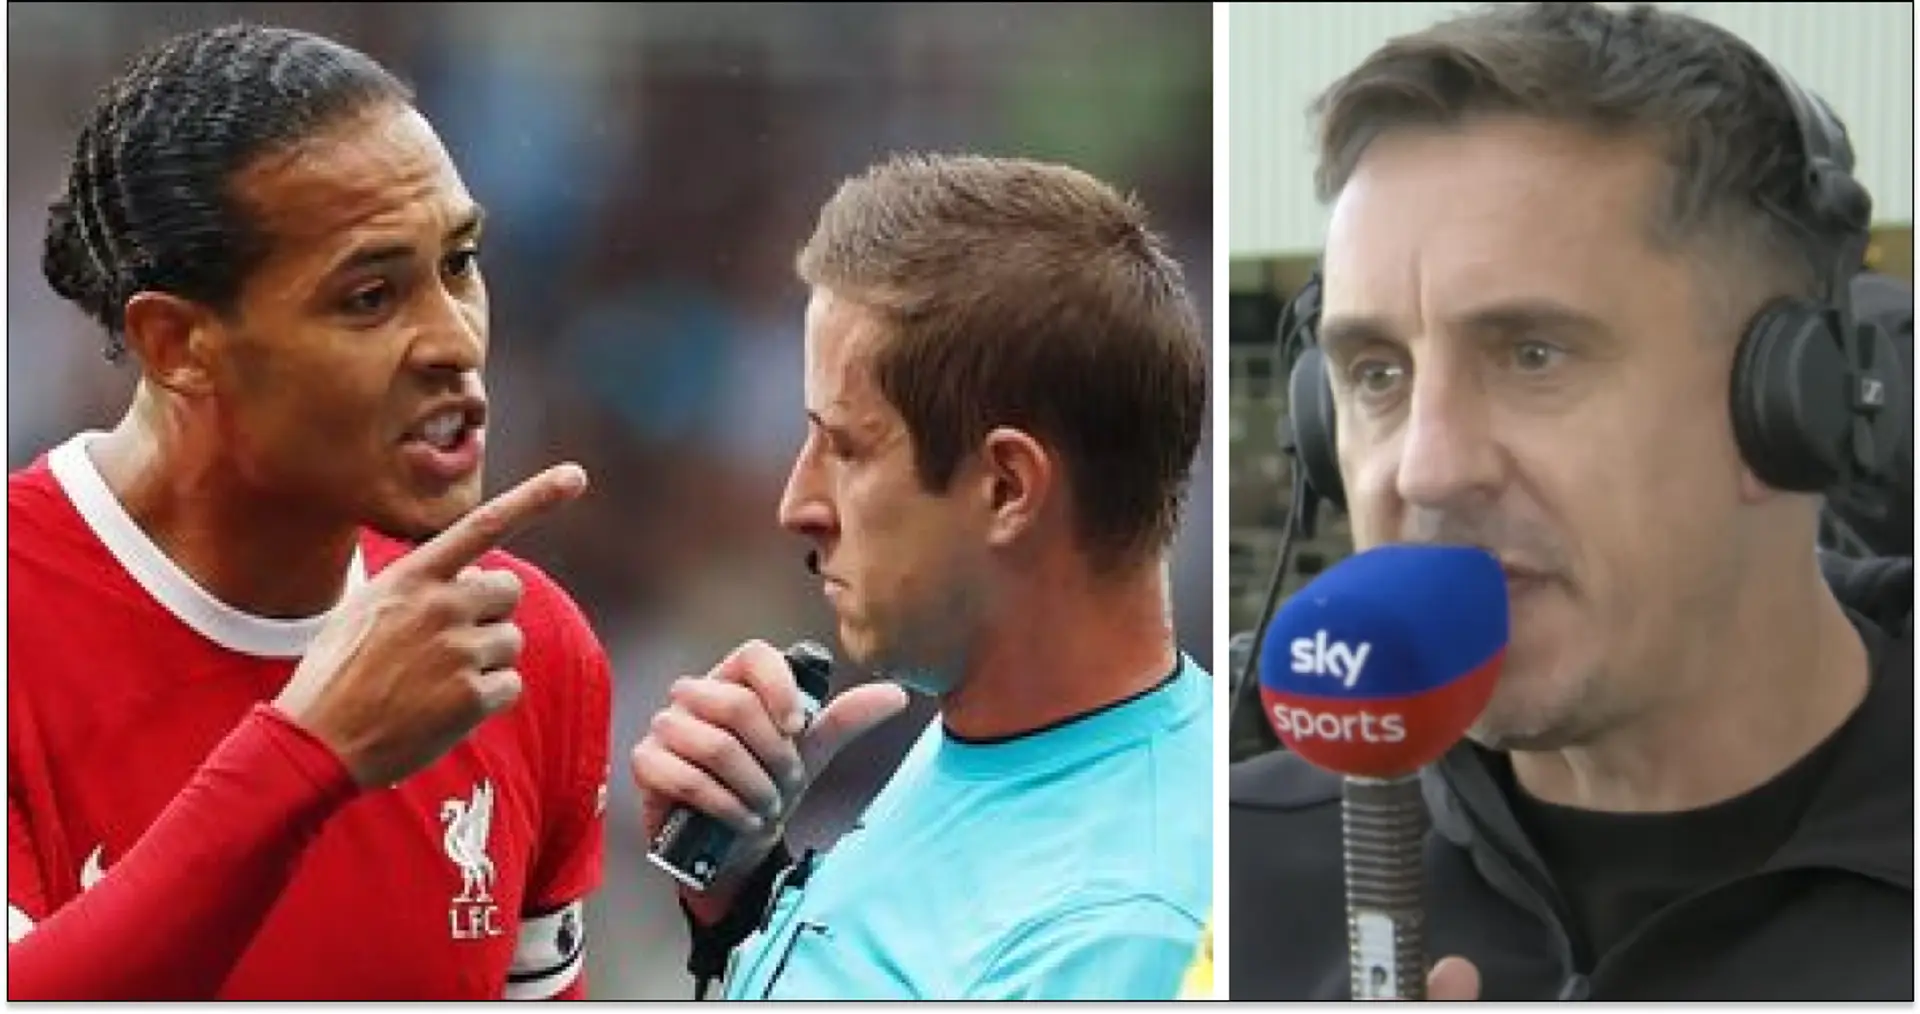 'Get off the pitch and take your medicine': Gary Neville thinks Van Dijk red card justified